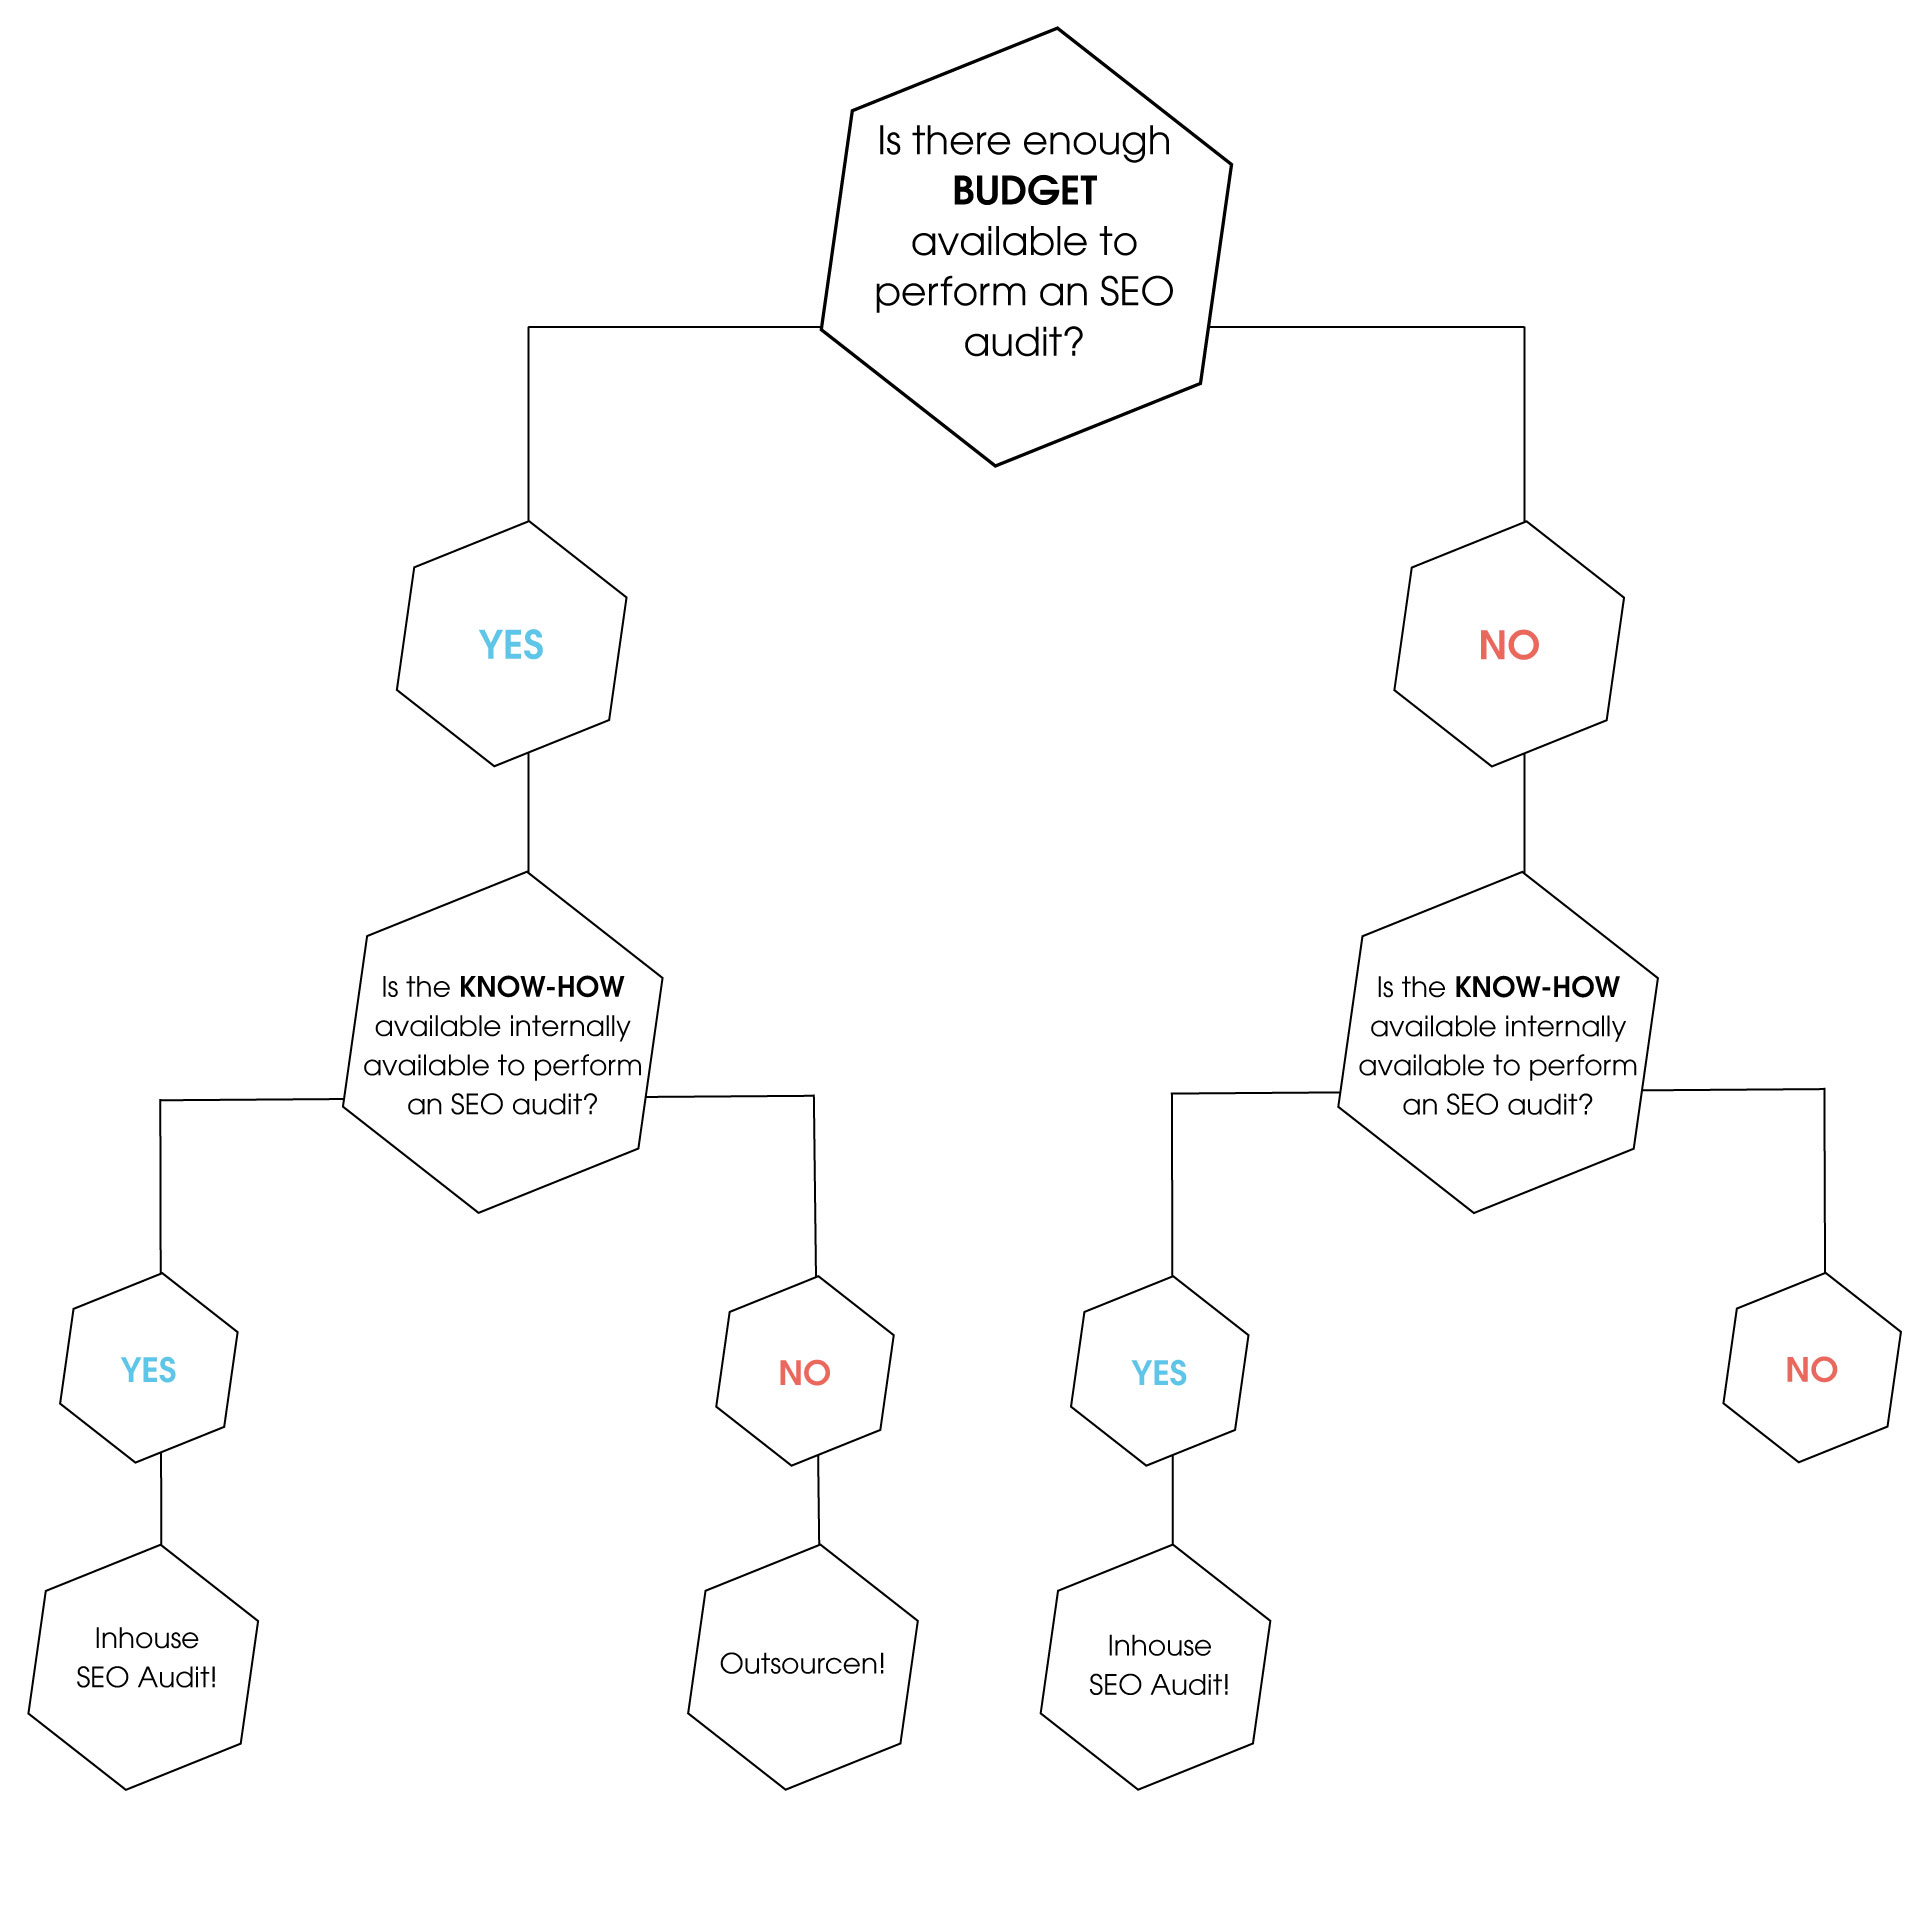 The image shows you a decision tree to help you decide between working in-house and outsourcing an SEO audit.